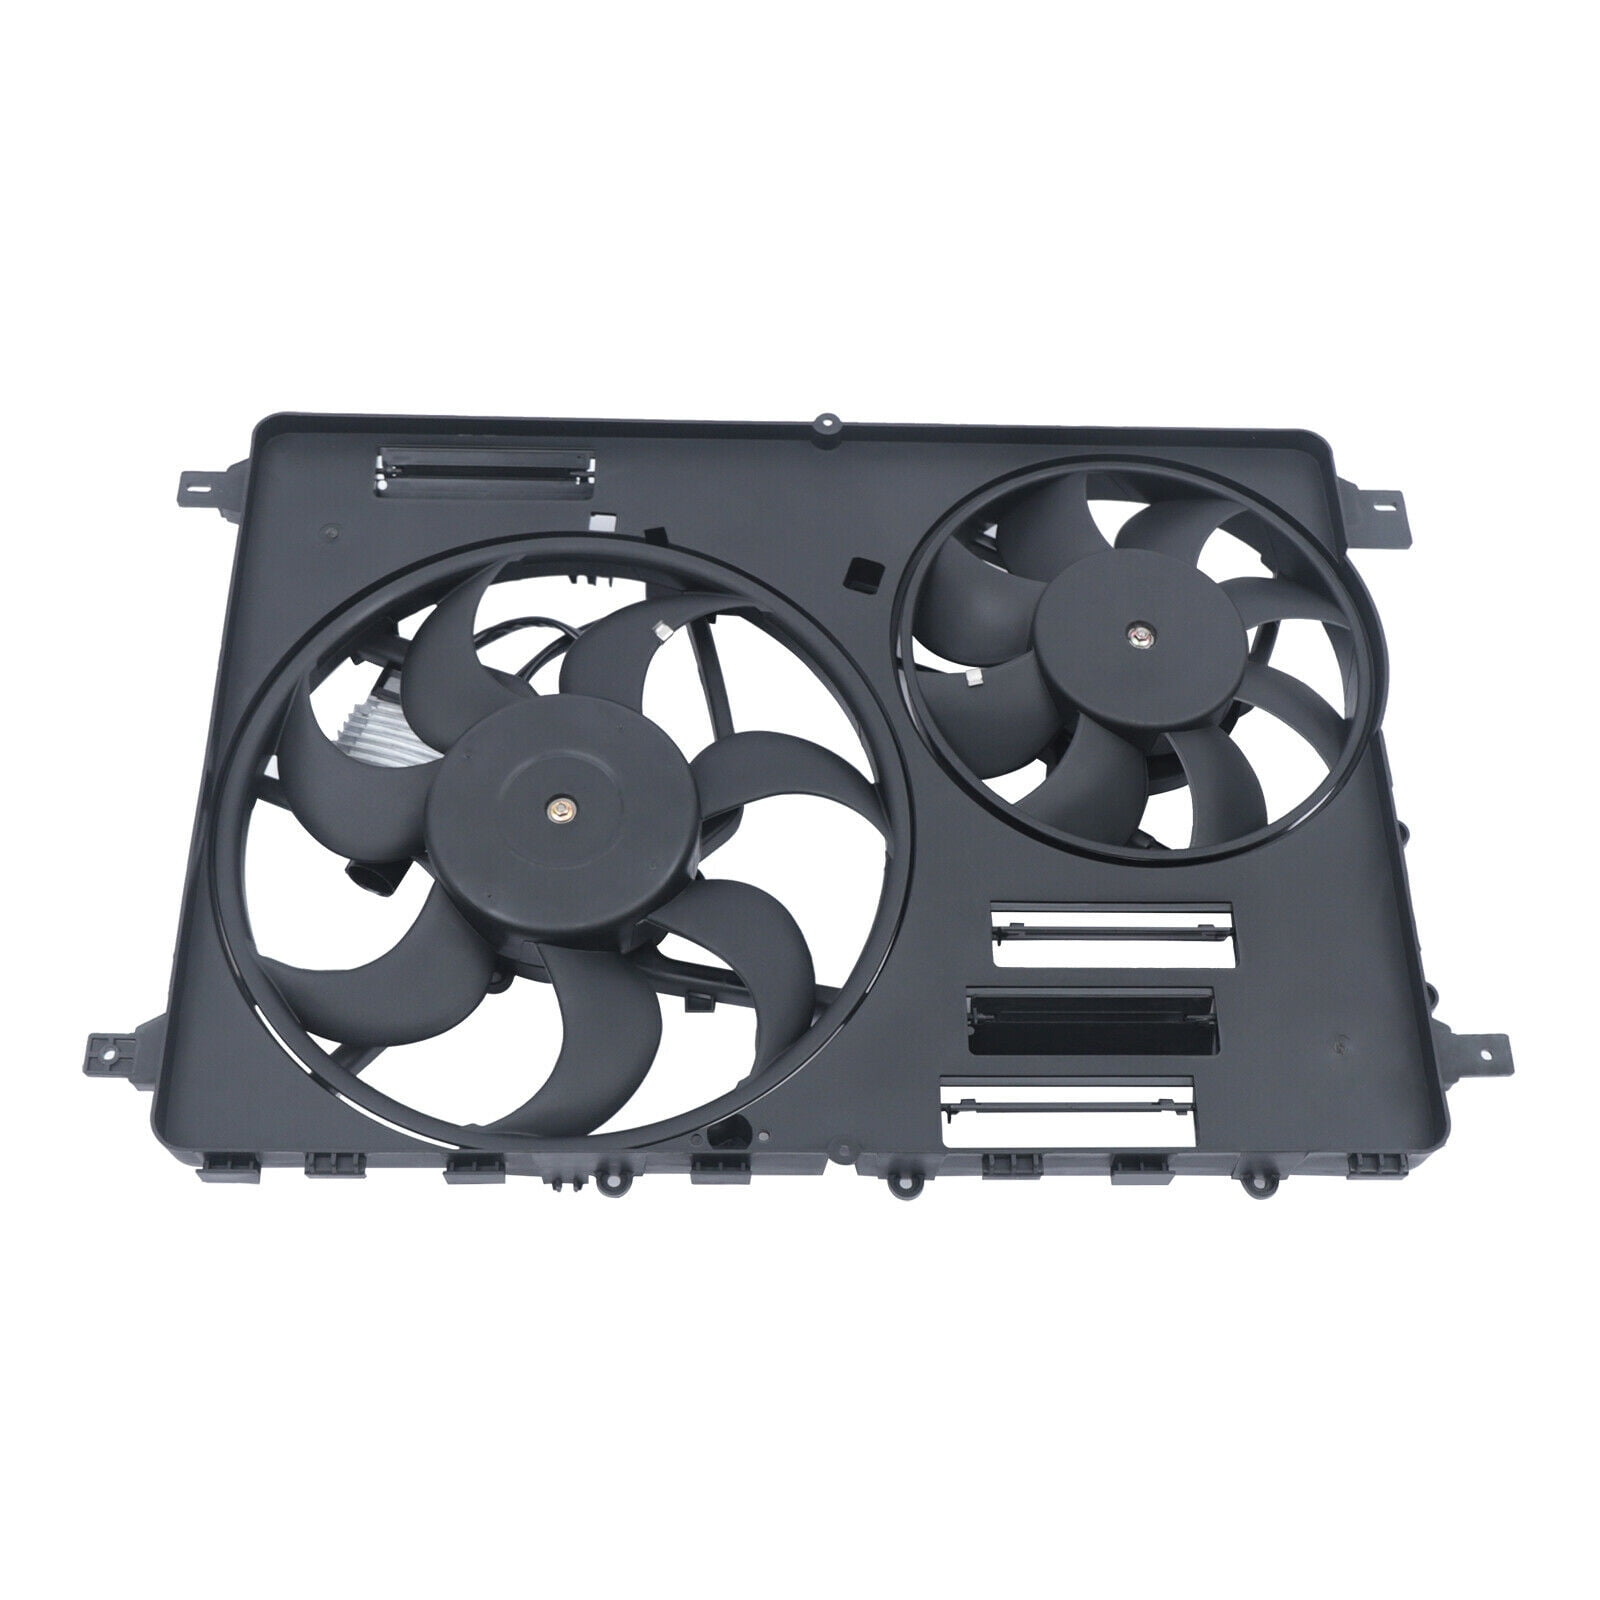 Cooling Fan Assembly for Volvo V70 S80 XC70 VO3115116 306686296,623840  Radiator Condenser Cooling Fan For 08-16 Volvo S80 V60 V70 XC60 XC70  306686296 